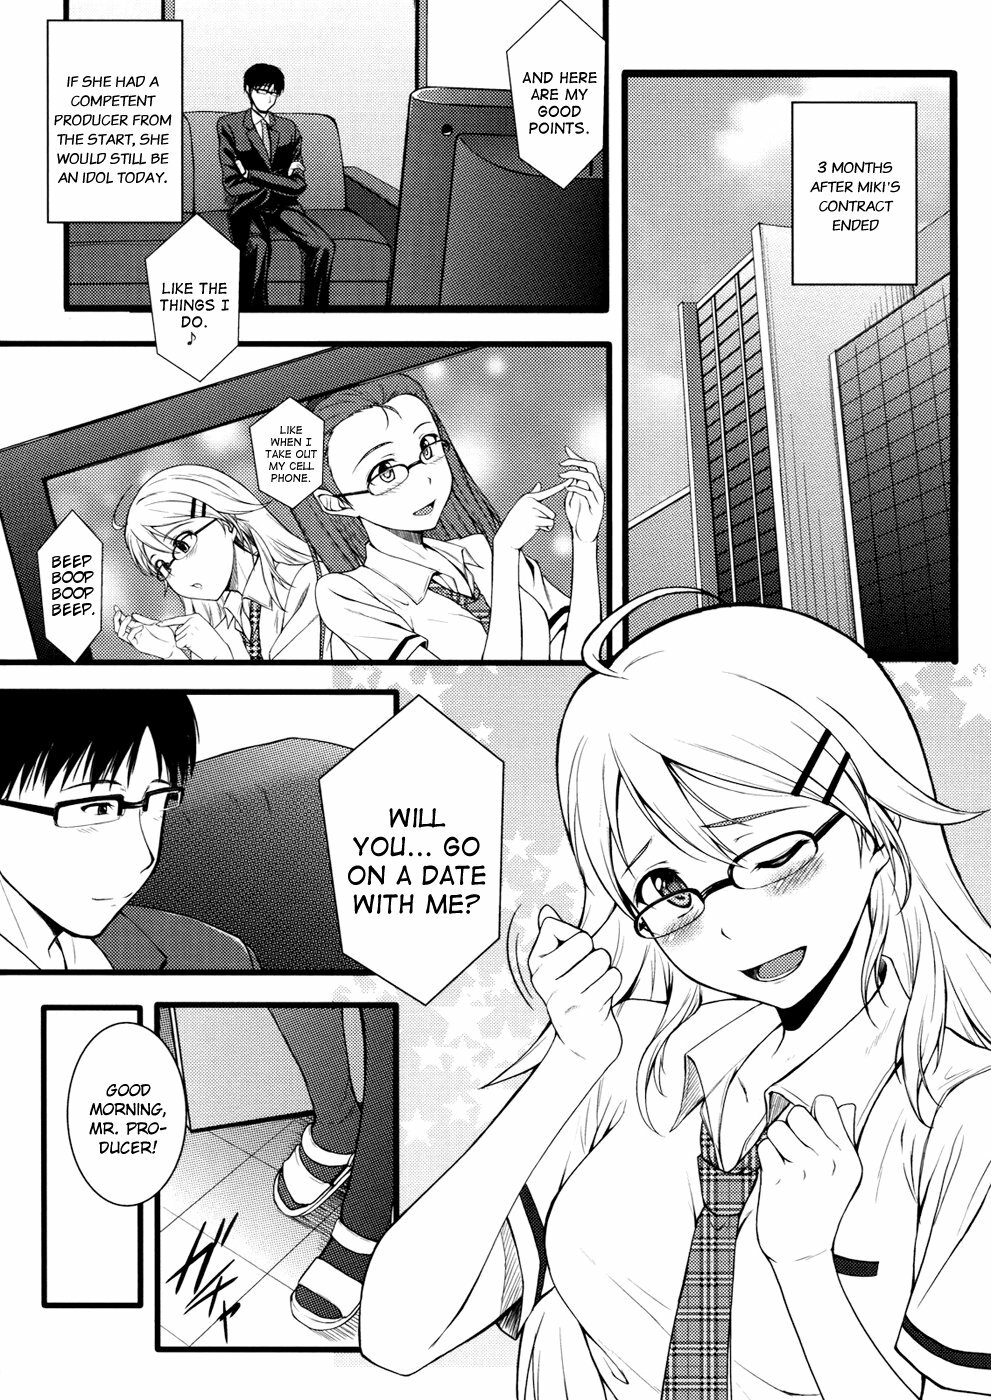 (C79) [Count2.4 (Nishi)] Continuation (THE iDOLM@STER) [English] [redCoMet] page 5 full